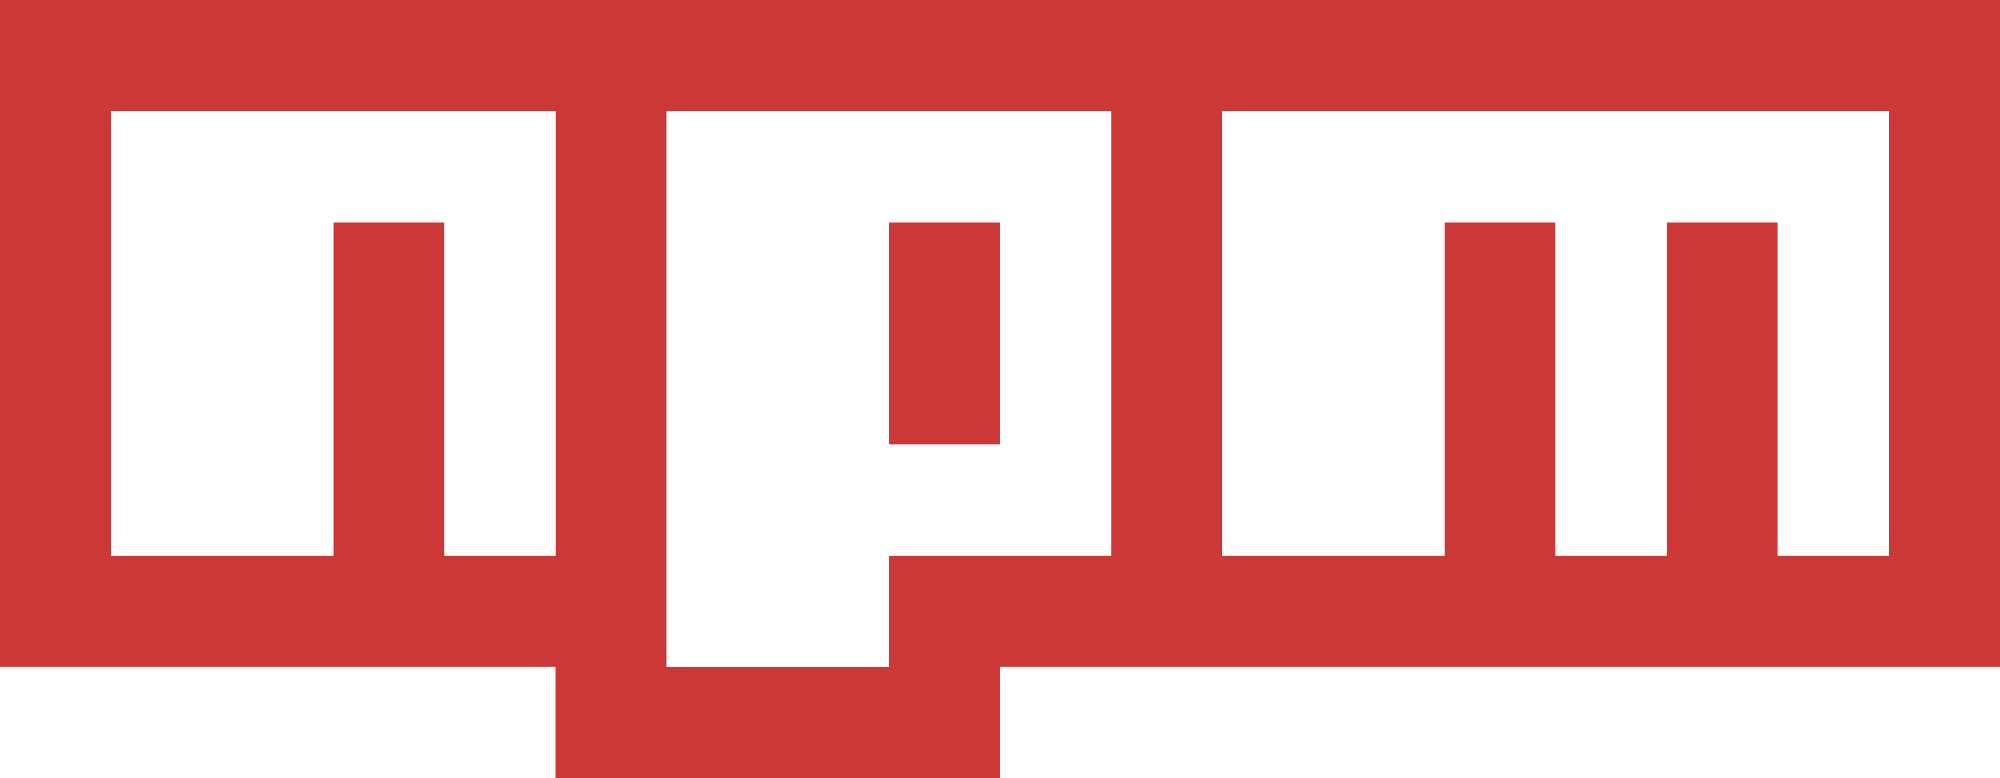 NPM Package Manager